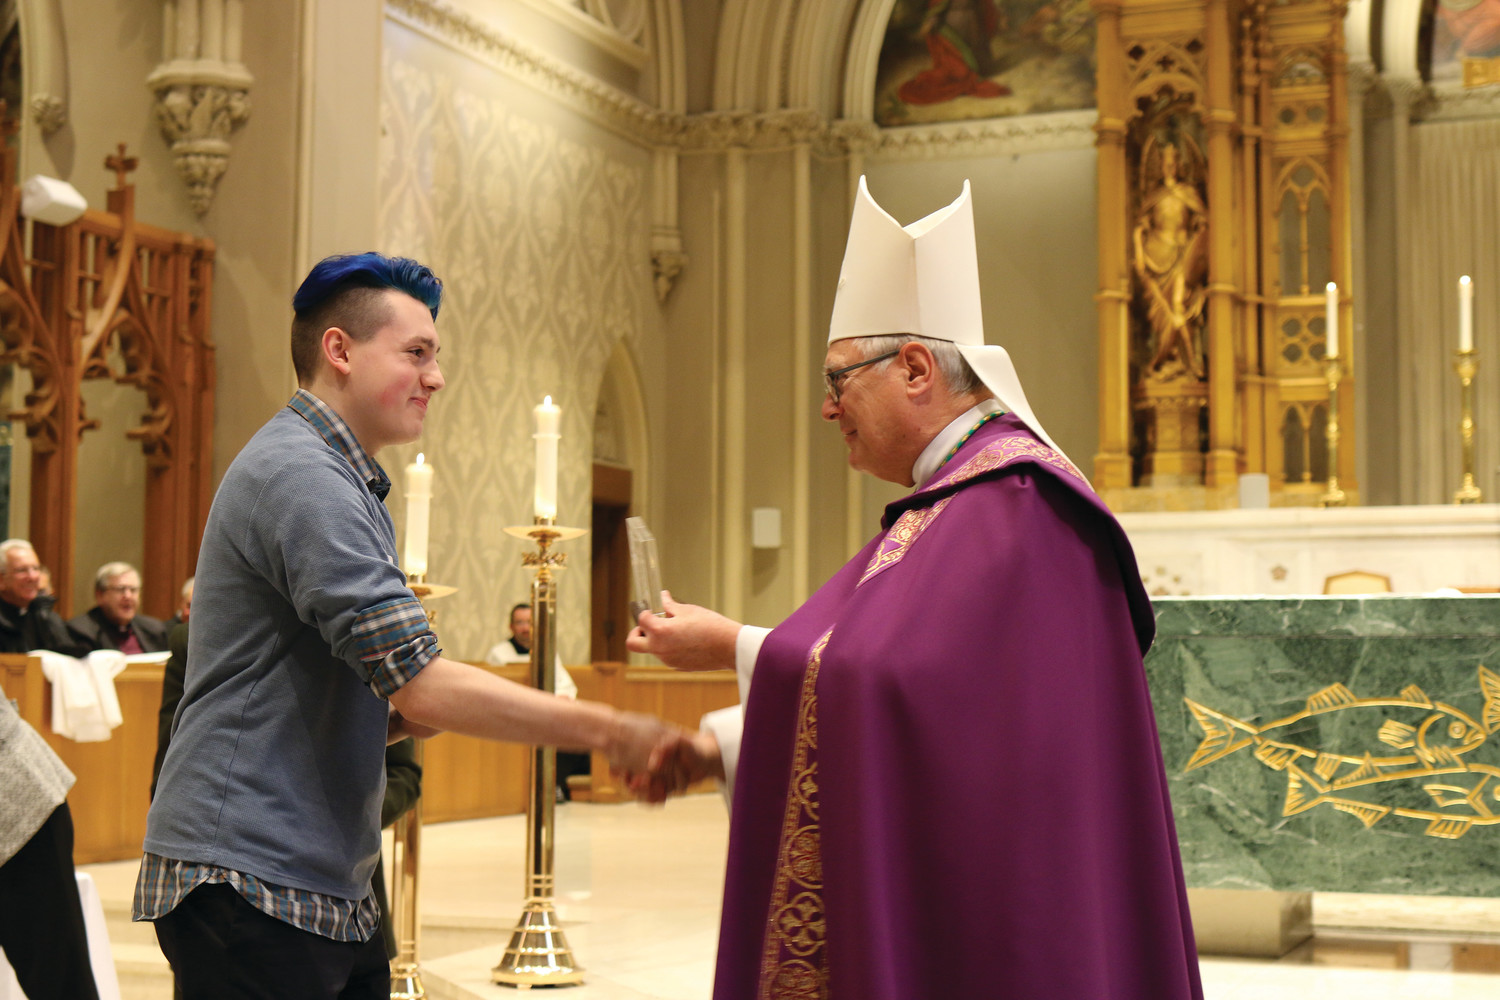 Bishop Thomas J. Tobin presents awards at the Diocesan Catholic Youth Ministry and Scout Awards celebration on Sunday, March 11, at the Cathedral of Saints Peter and Paul in Providence. Pictured: Noah Pike, parishioner of SS. Rose and Clement Church, honored with a St. Timothy Award